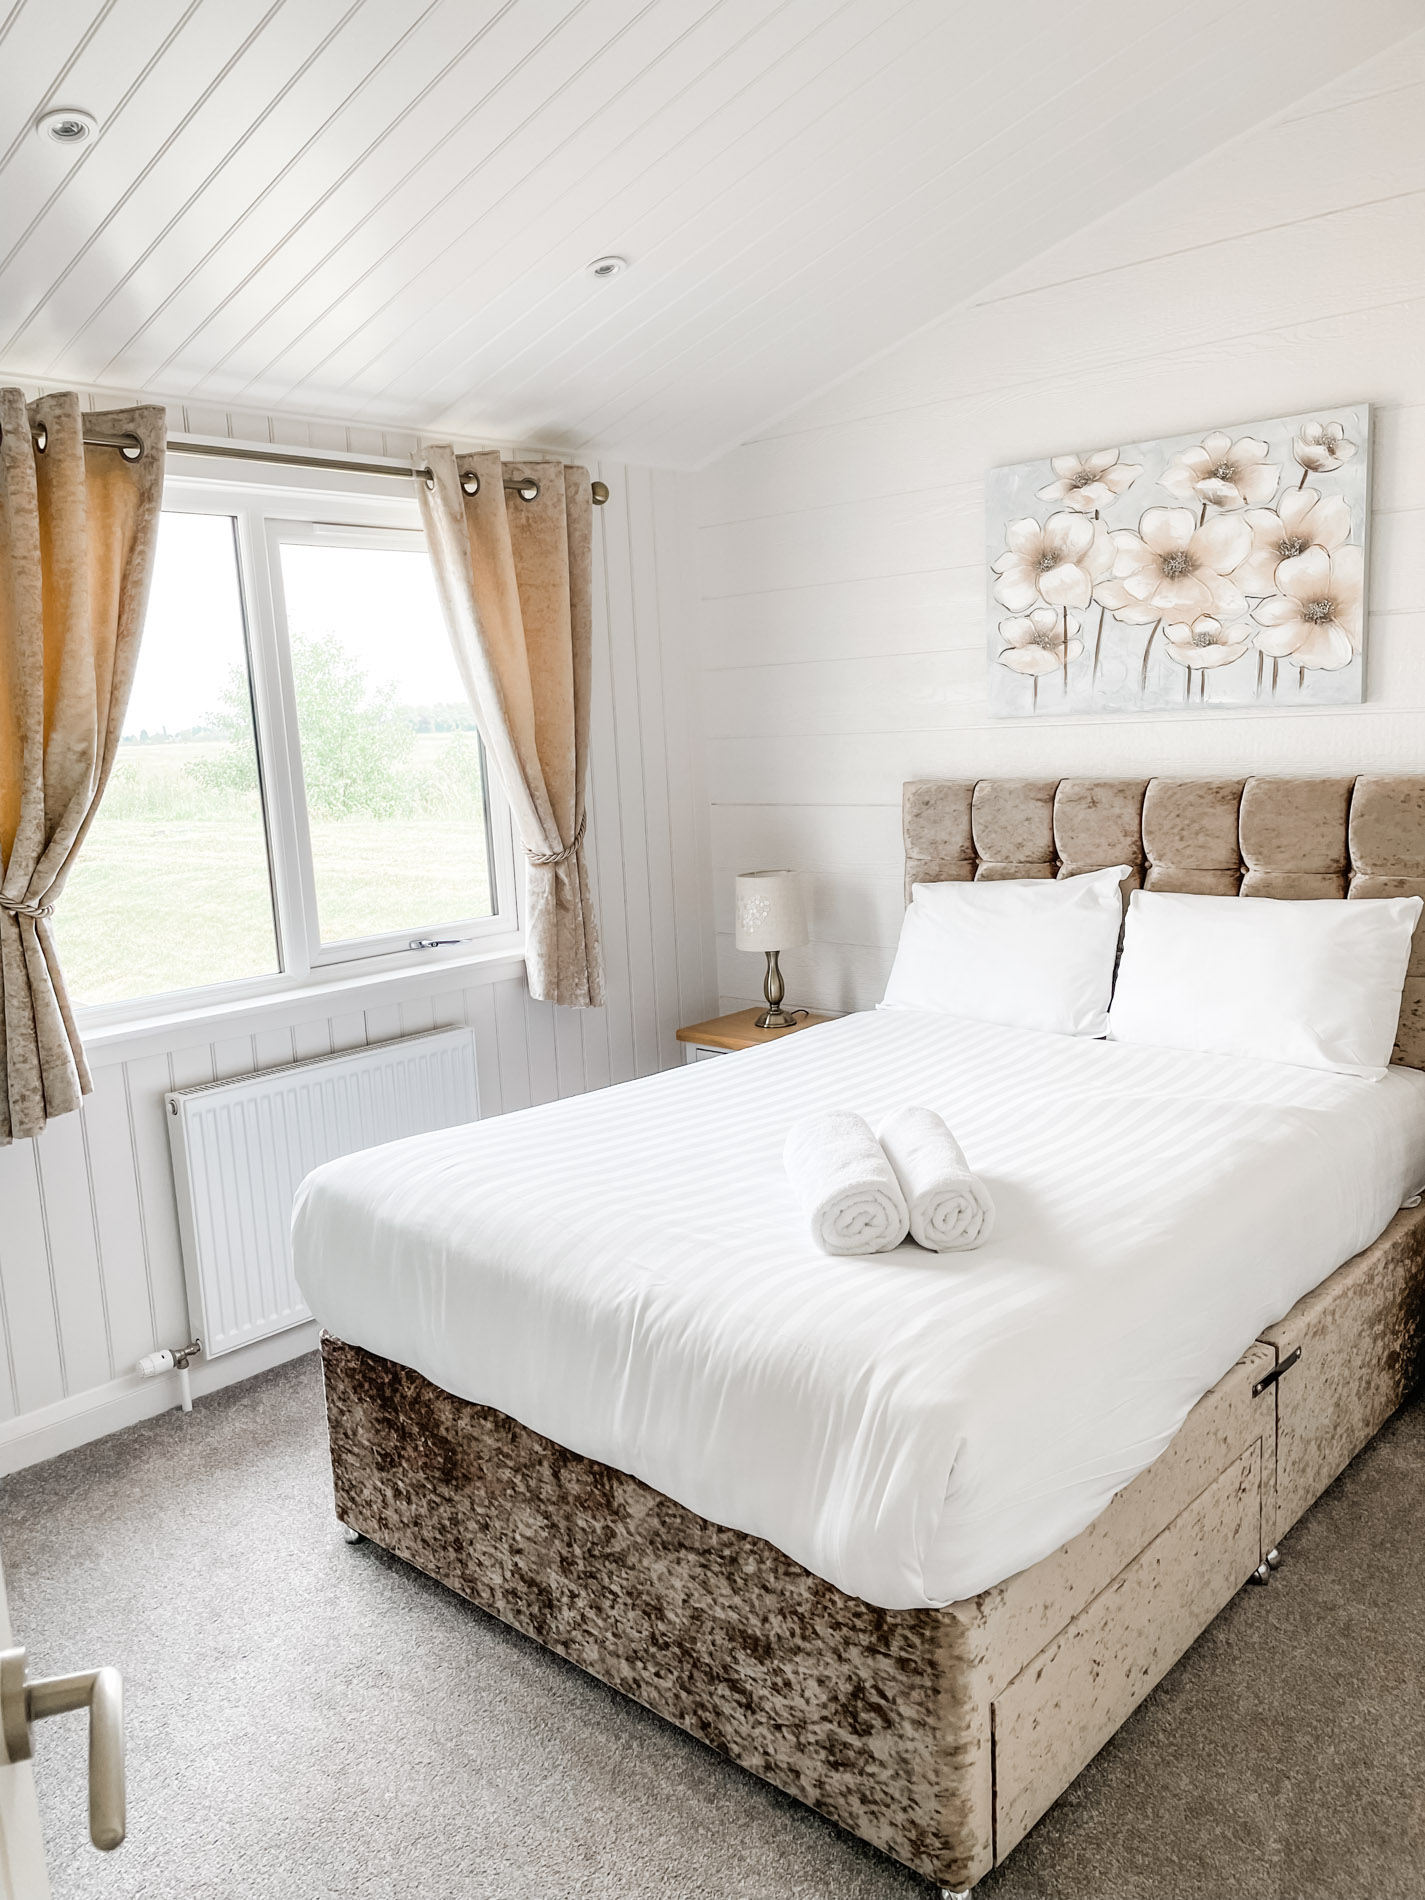 Double bedroom at Silverwood Resort,Perthshire